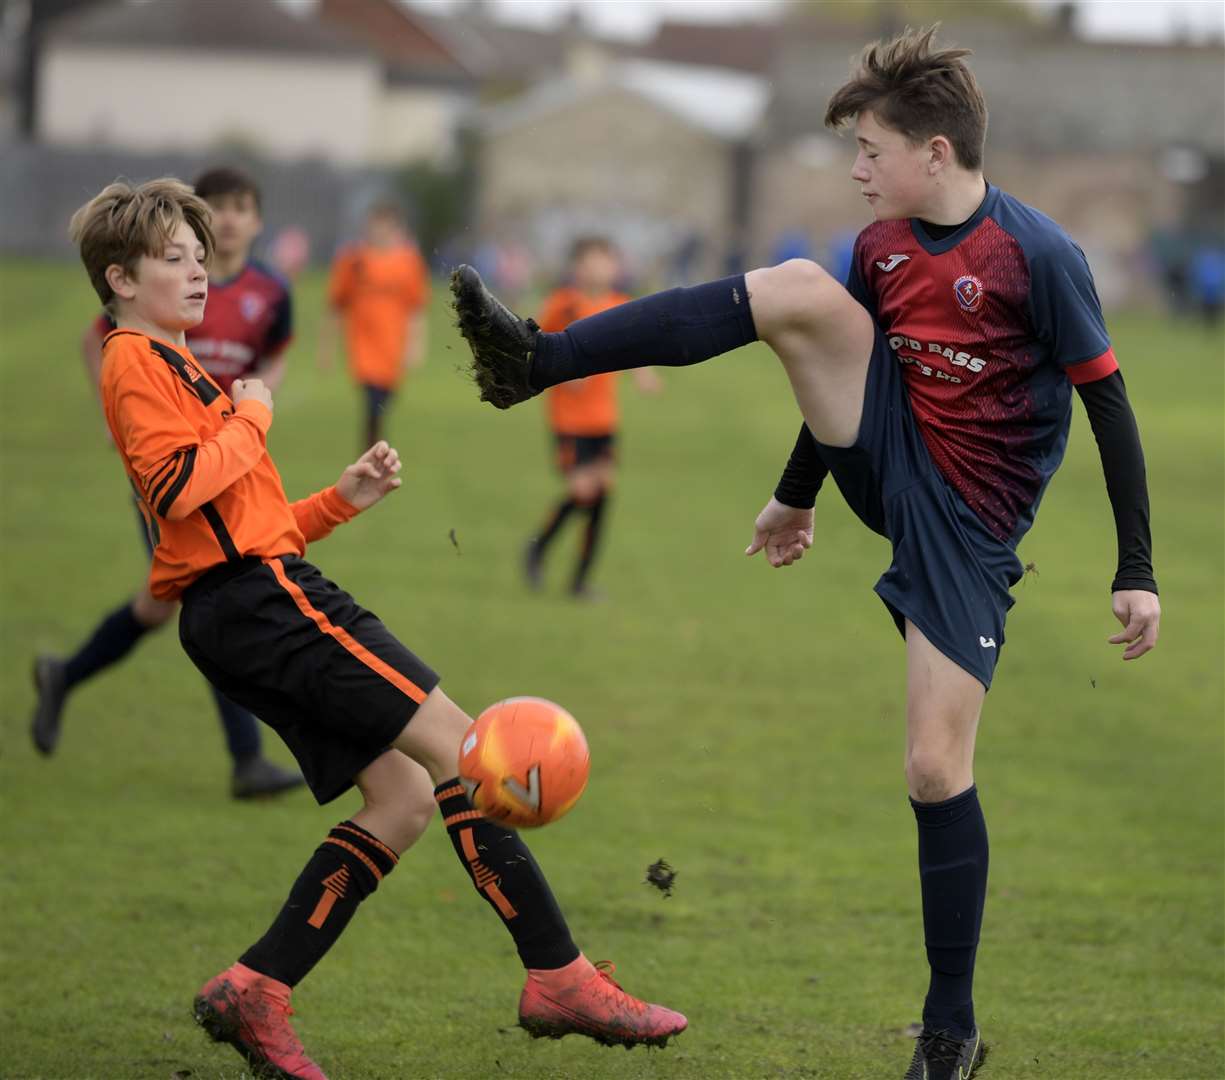 Hempstead Valley under-14s (blue) put their foot in against New Road under-14s. Picture: Barry Goodwin (42745152)